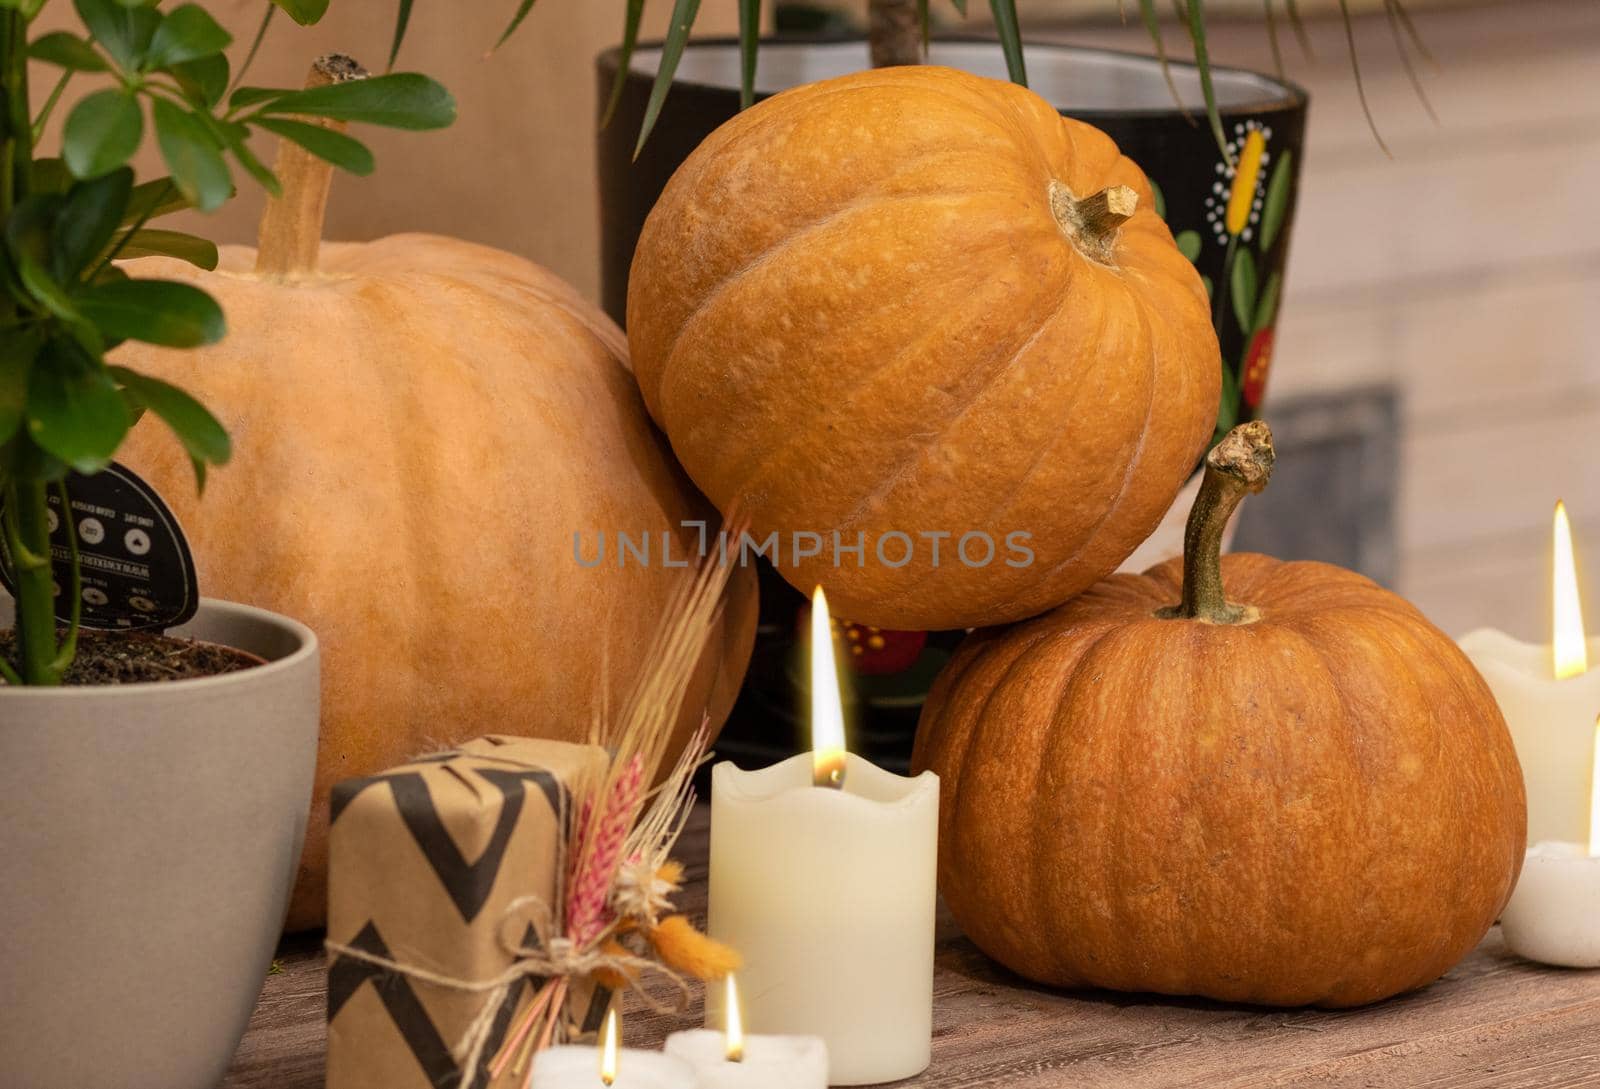 Halloween Pumpkins in the wooden crates with candles, straw, plants